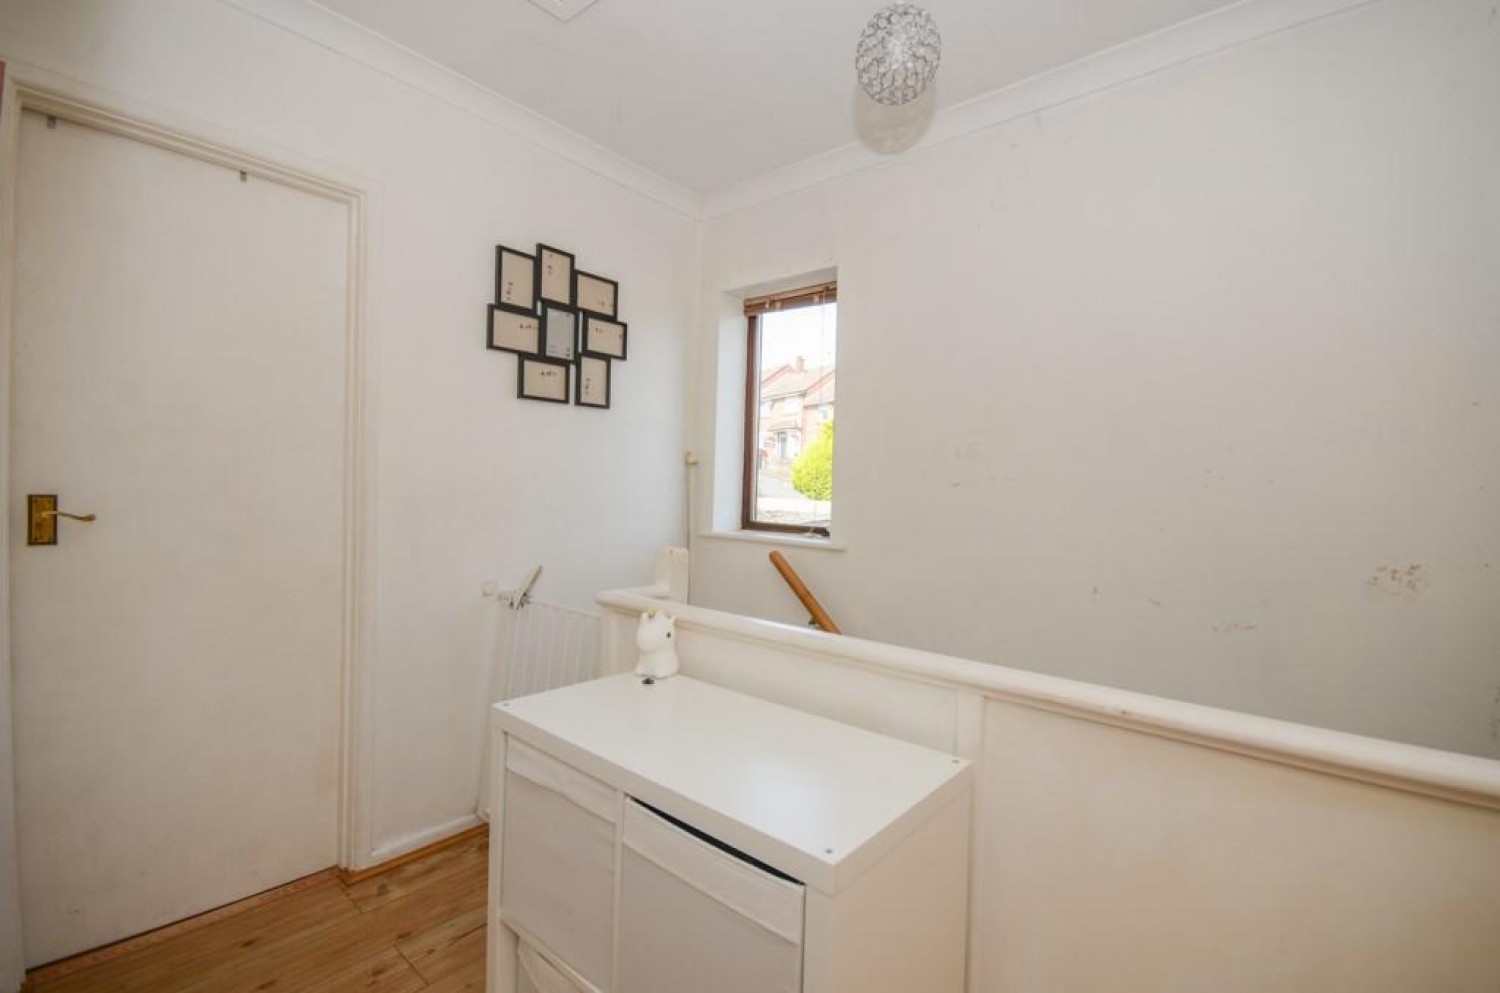 Westbourne Road, Downend, Bristol, BS16 6RB